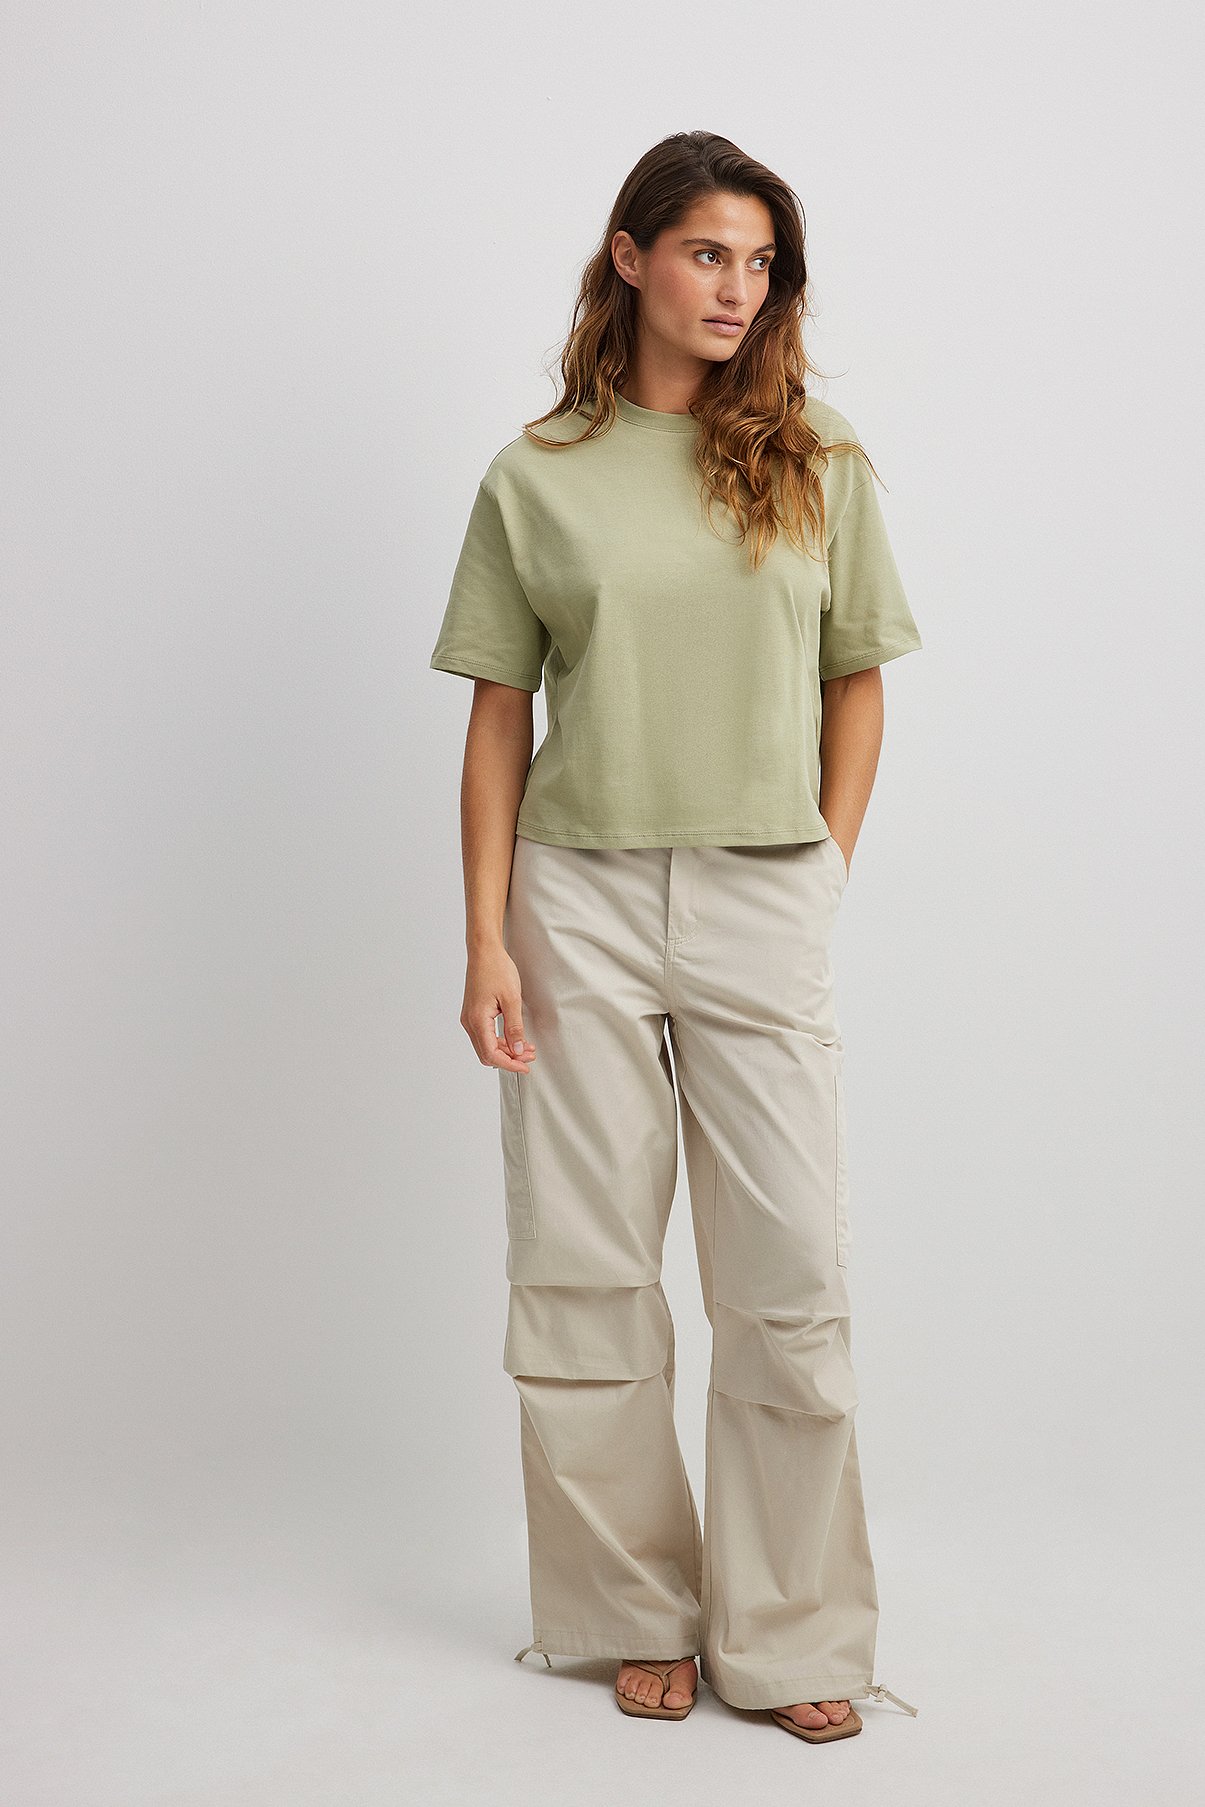 Tommy Bahama Green Cargo Pants for Women